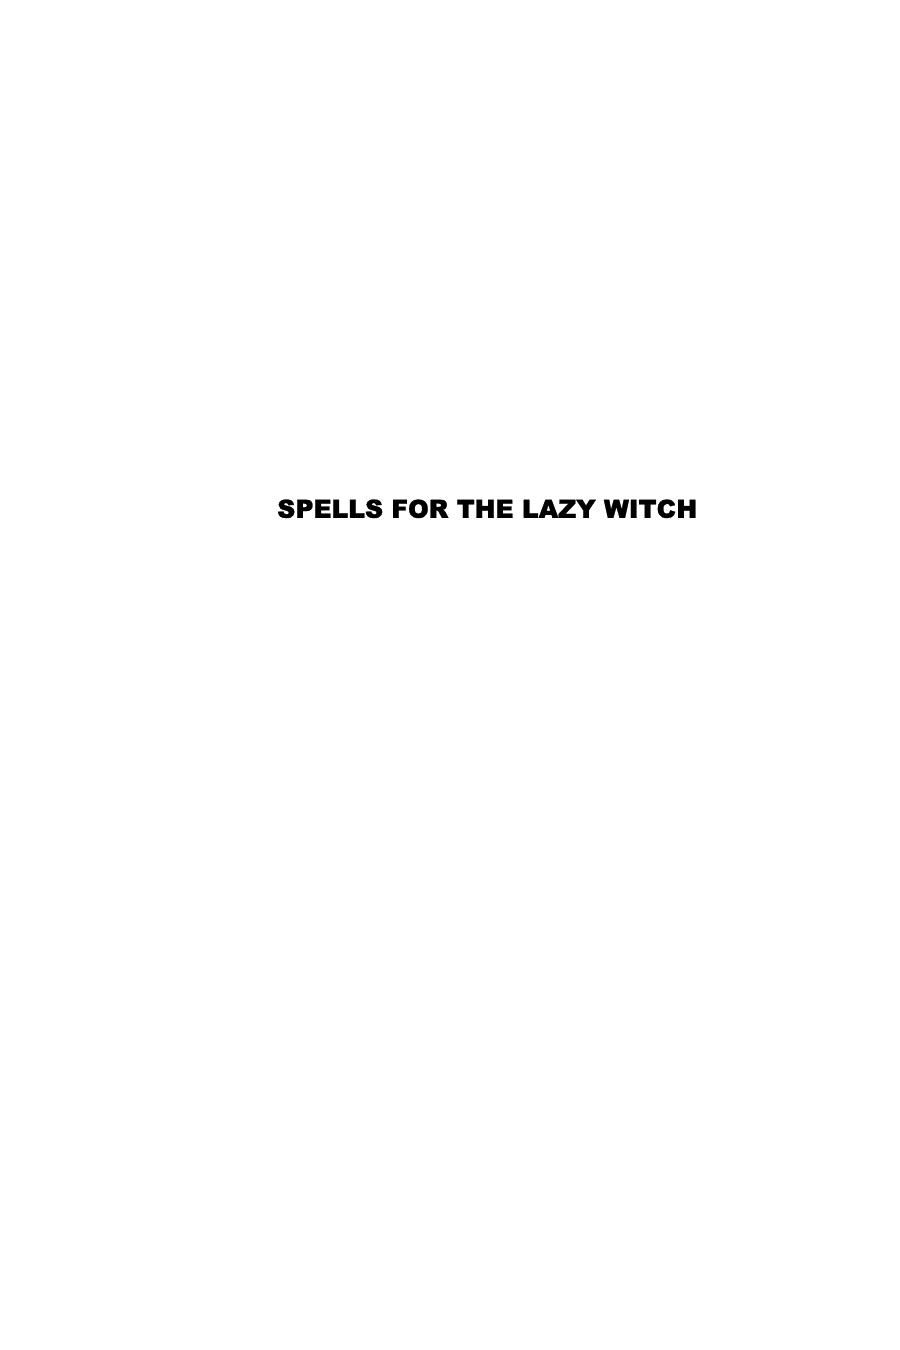 Spells for the Lazy Witch